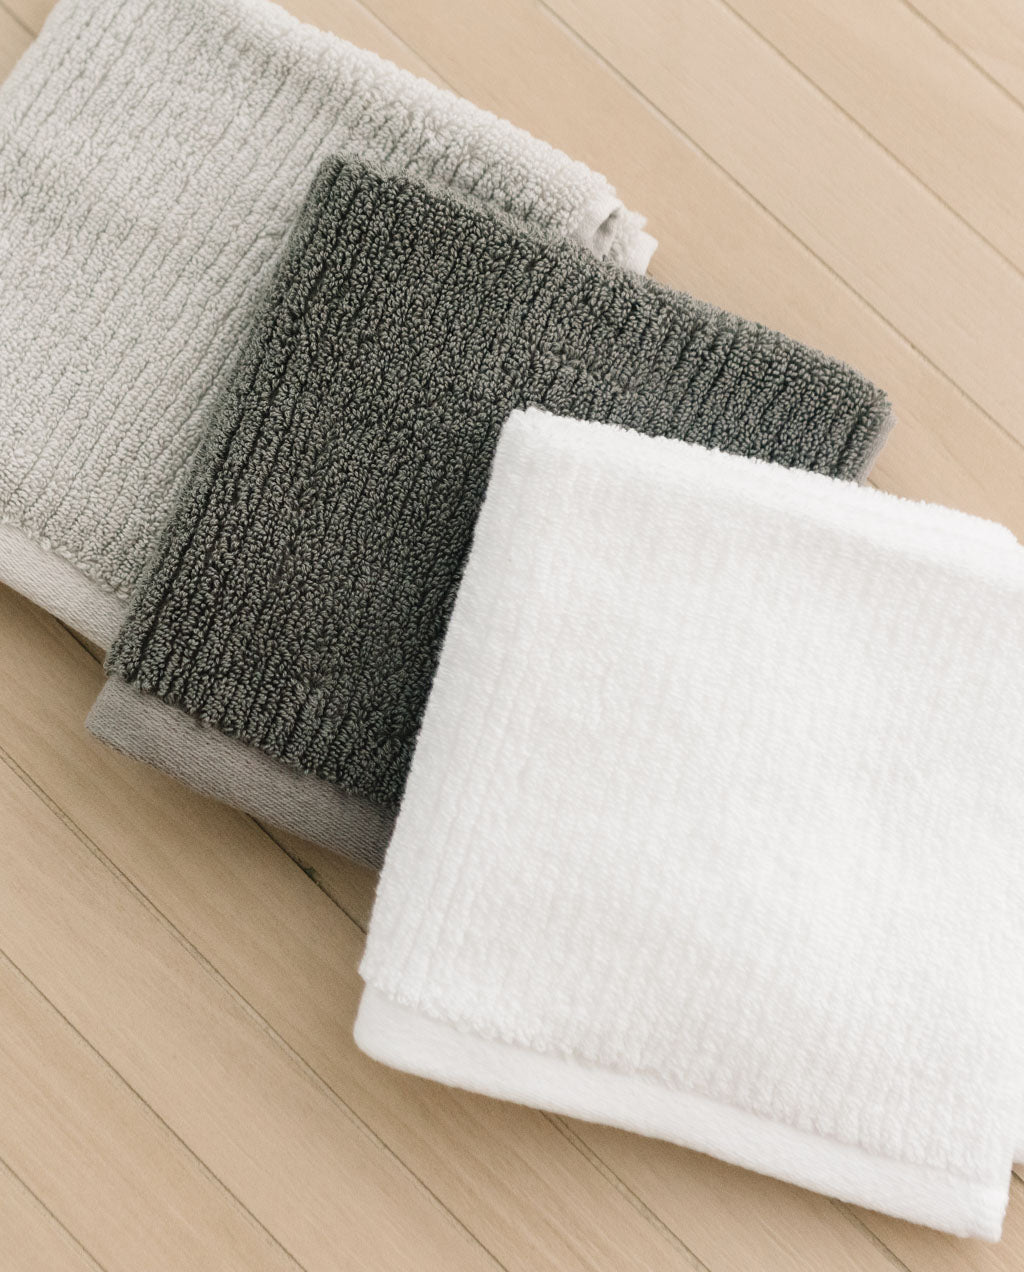 Charcoal White Light Grey Ribbed Terry Wash Cloths resting on a wood surface.